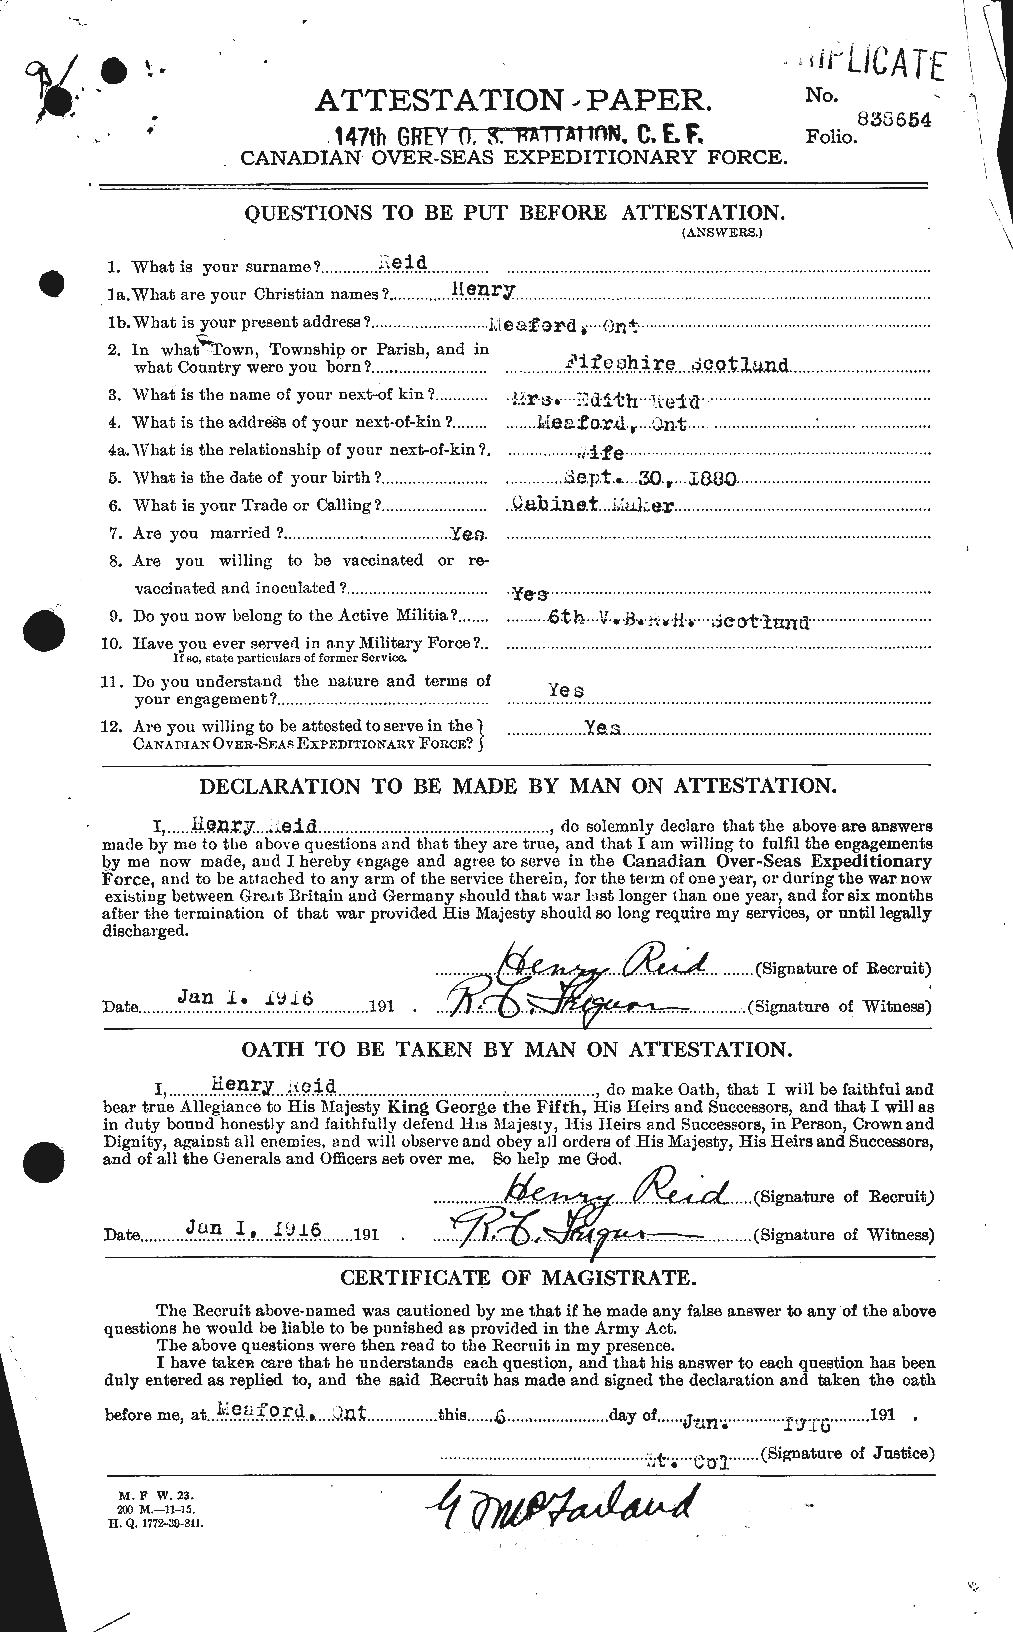 Personnel Records of the First World War - CEF 598594a